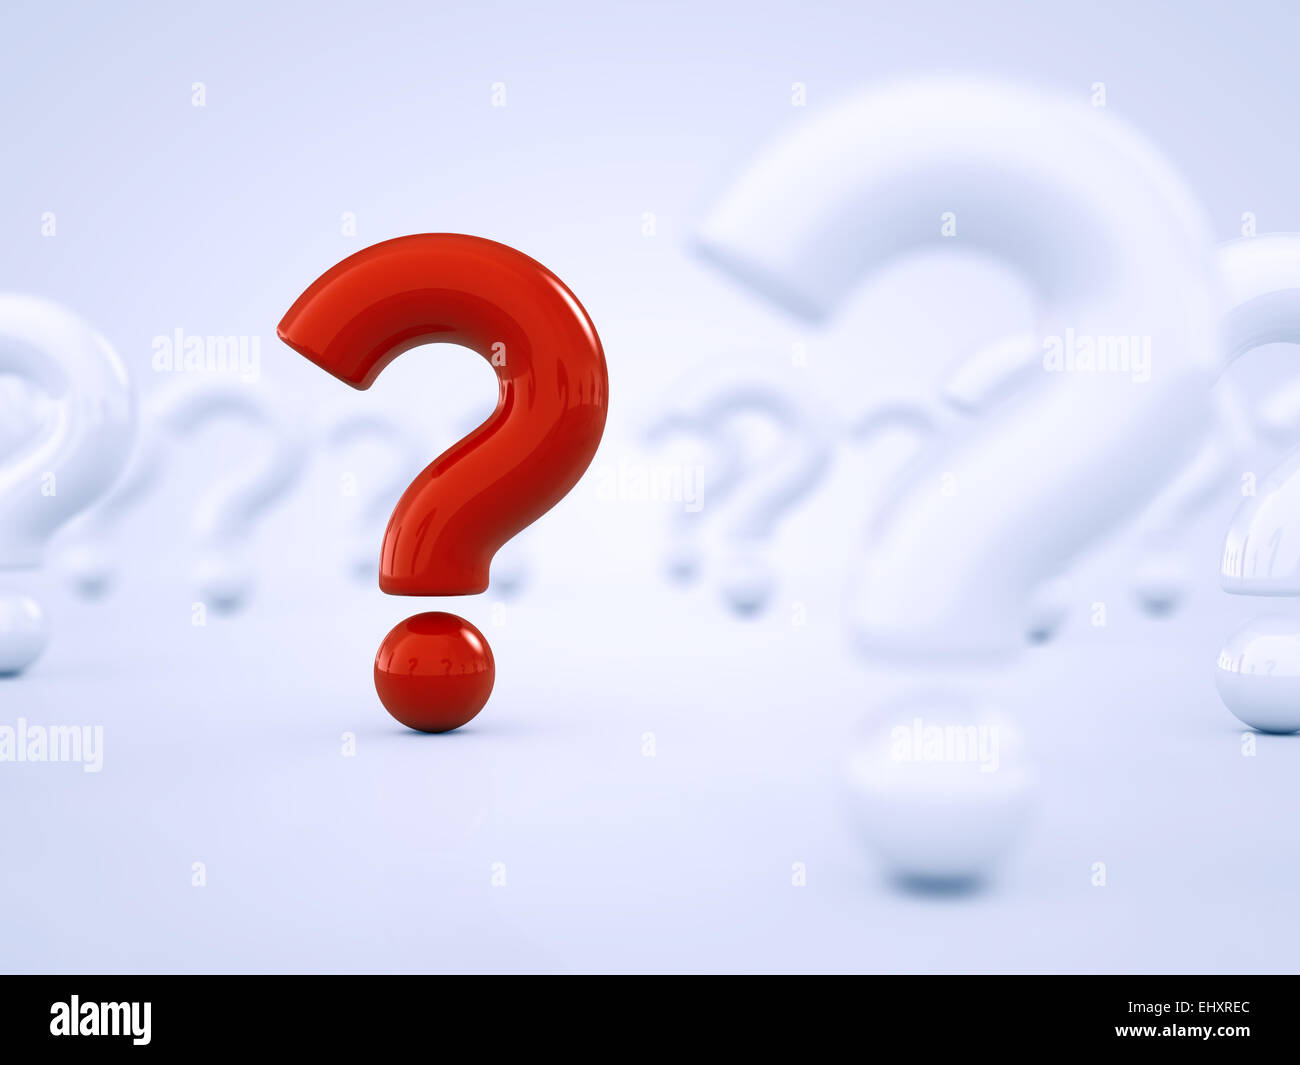 Red question mark standing out amid white question marks Stock Photo